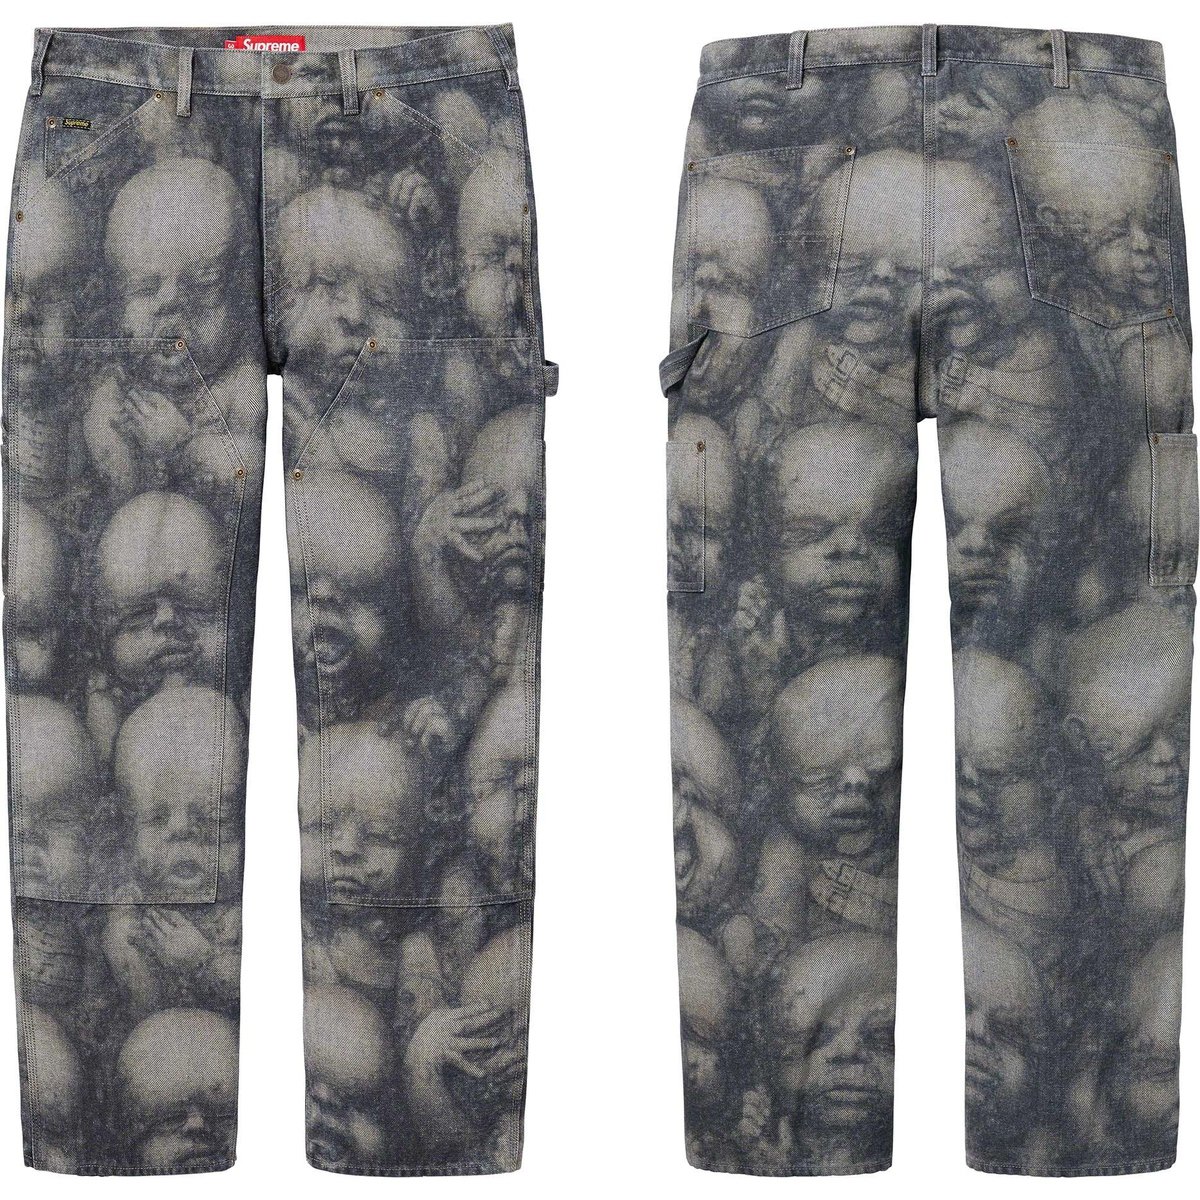 Supreme H.R. Giger Double Knee Jean for fall winter 23 season